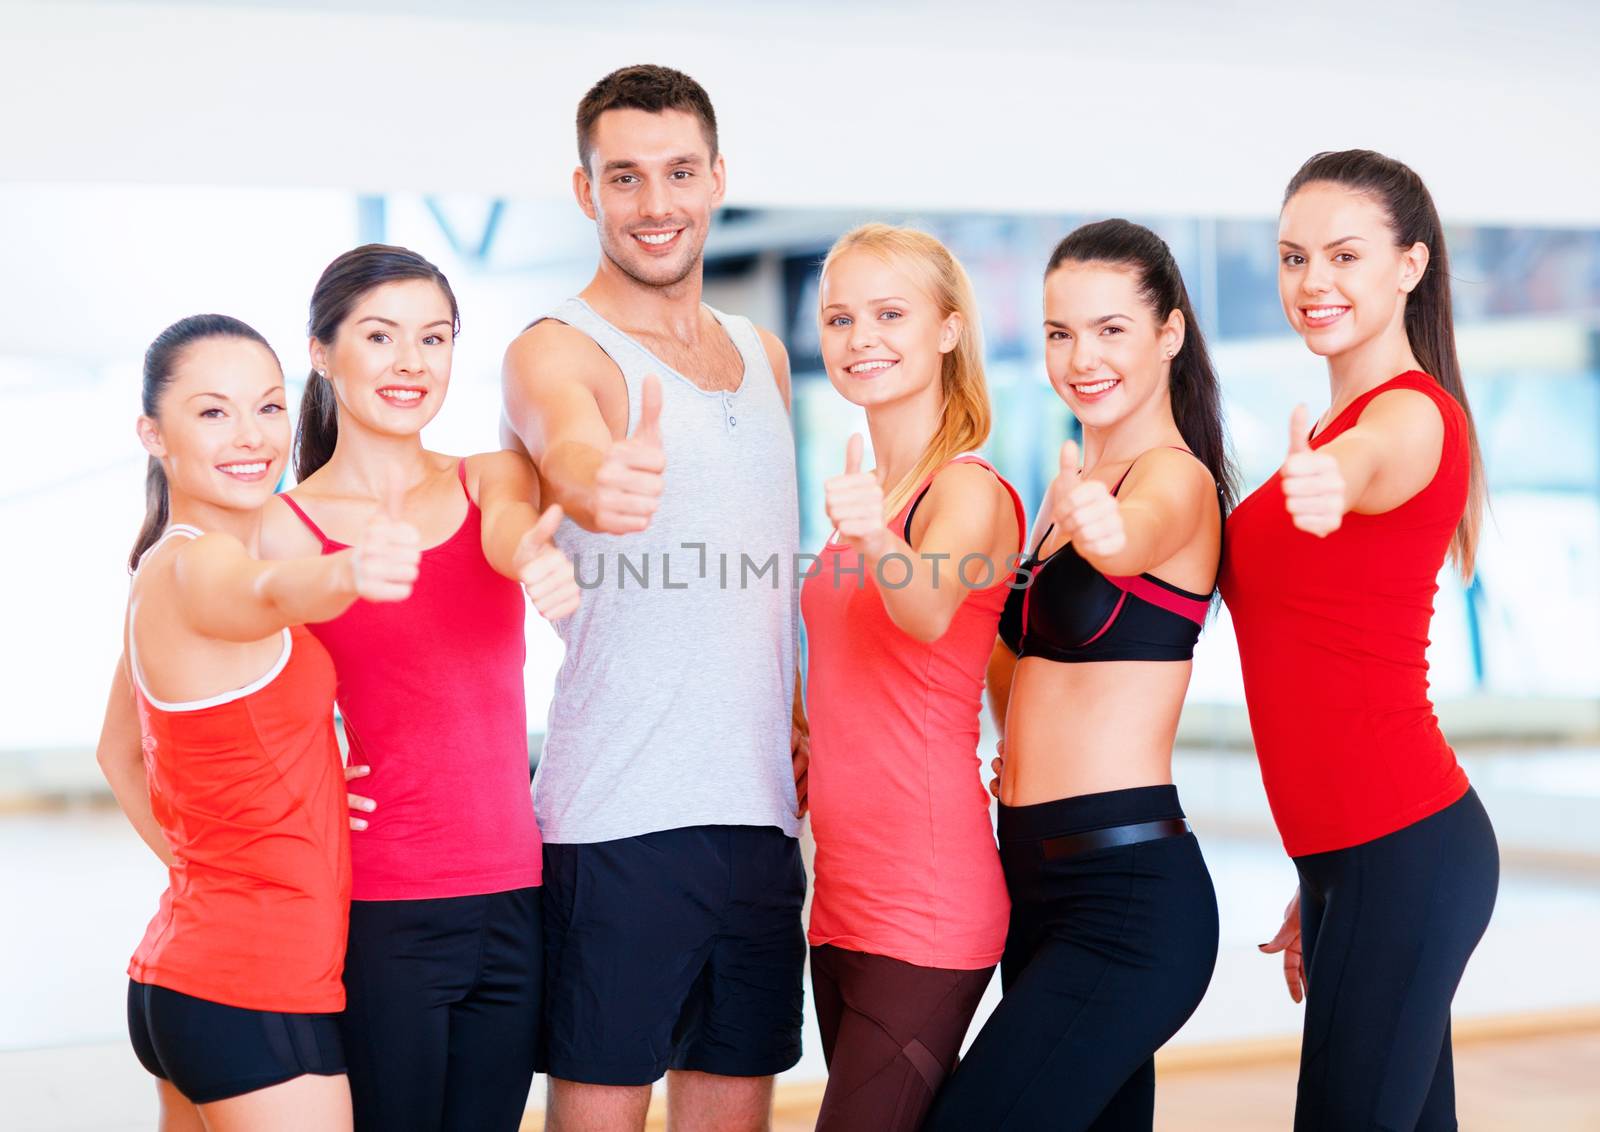 group of people in the gym showing thumbs up by dolgachov